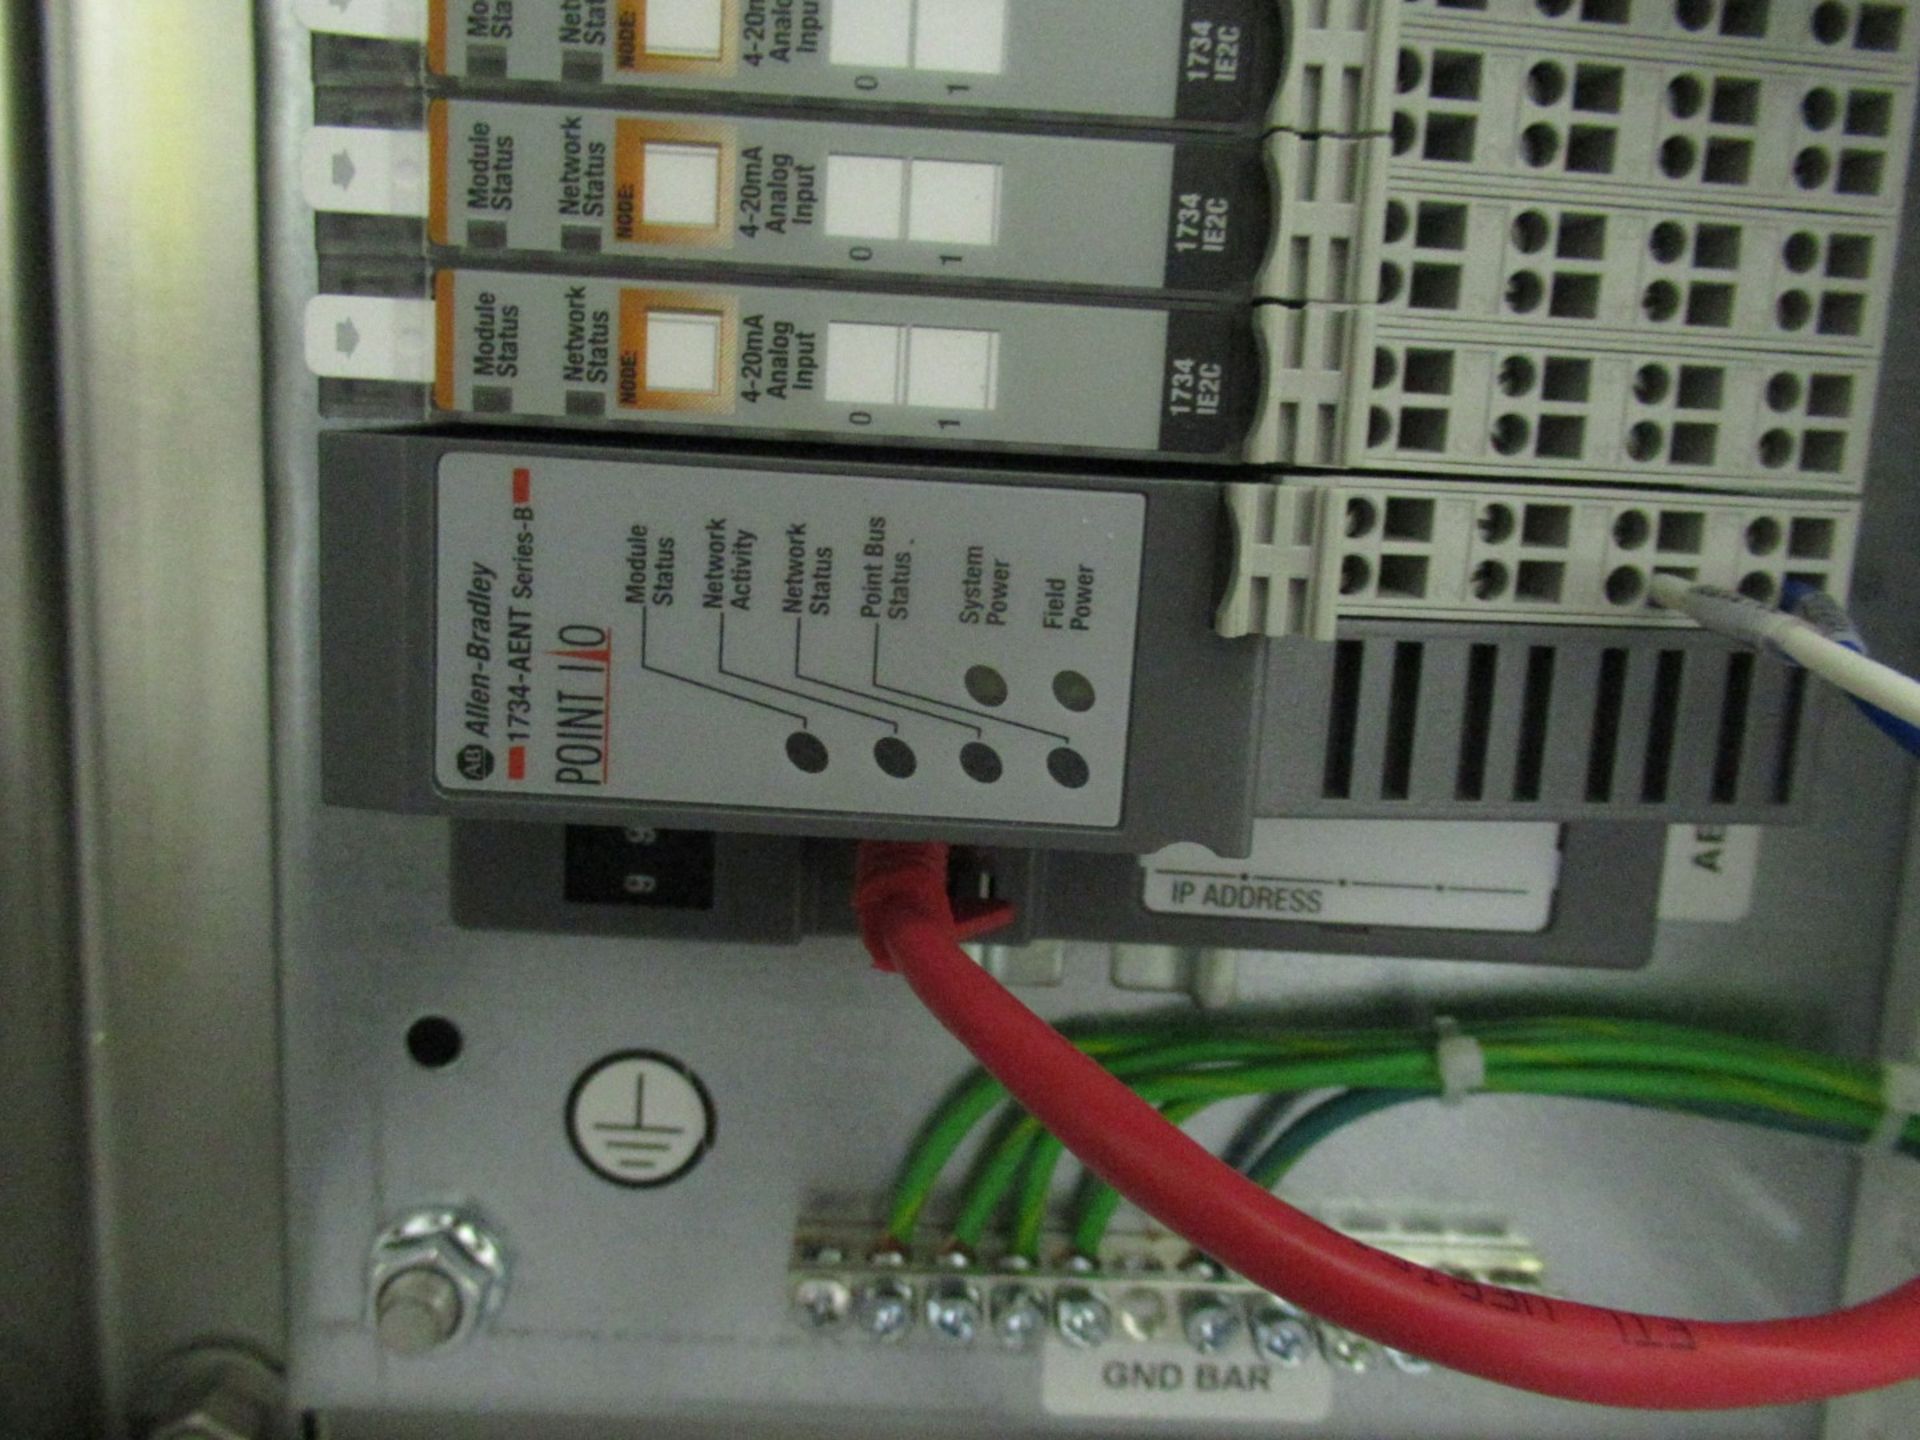 Control Panel - Image 7 of 8